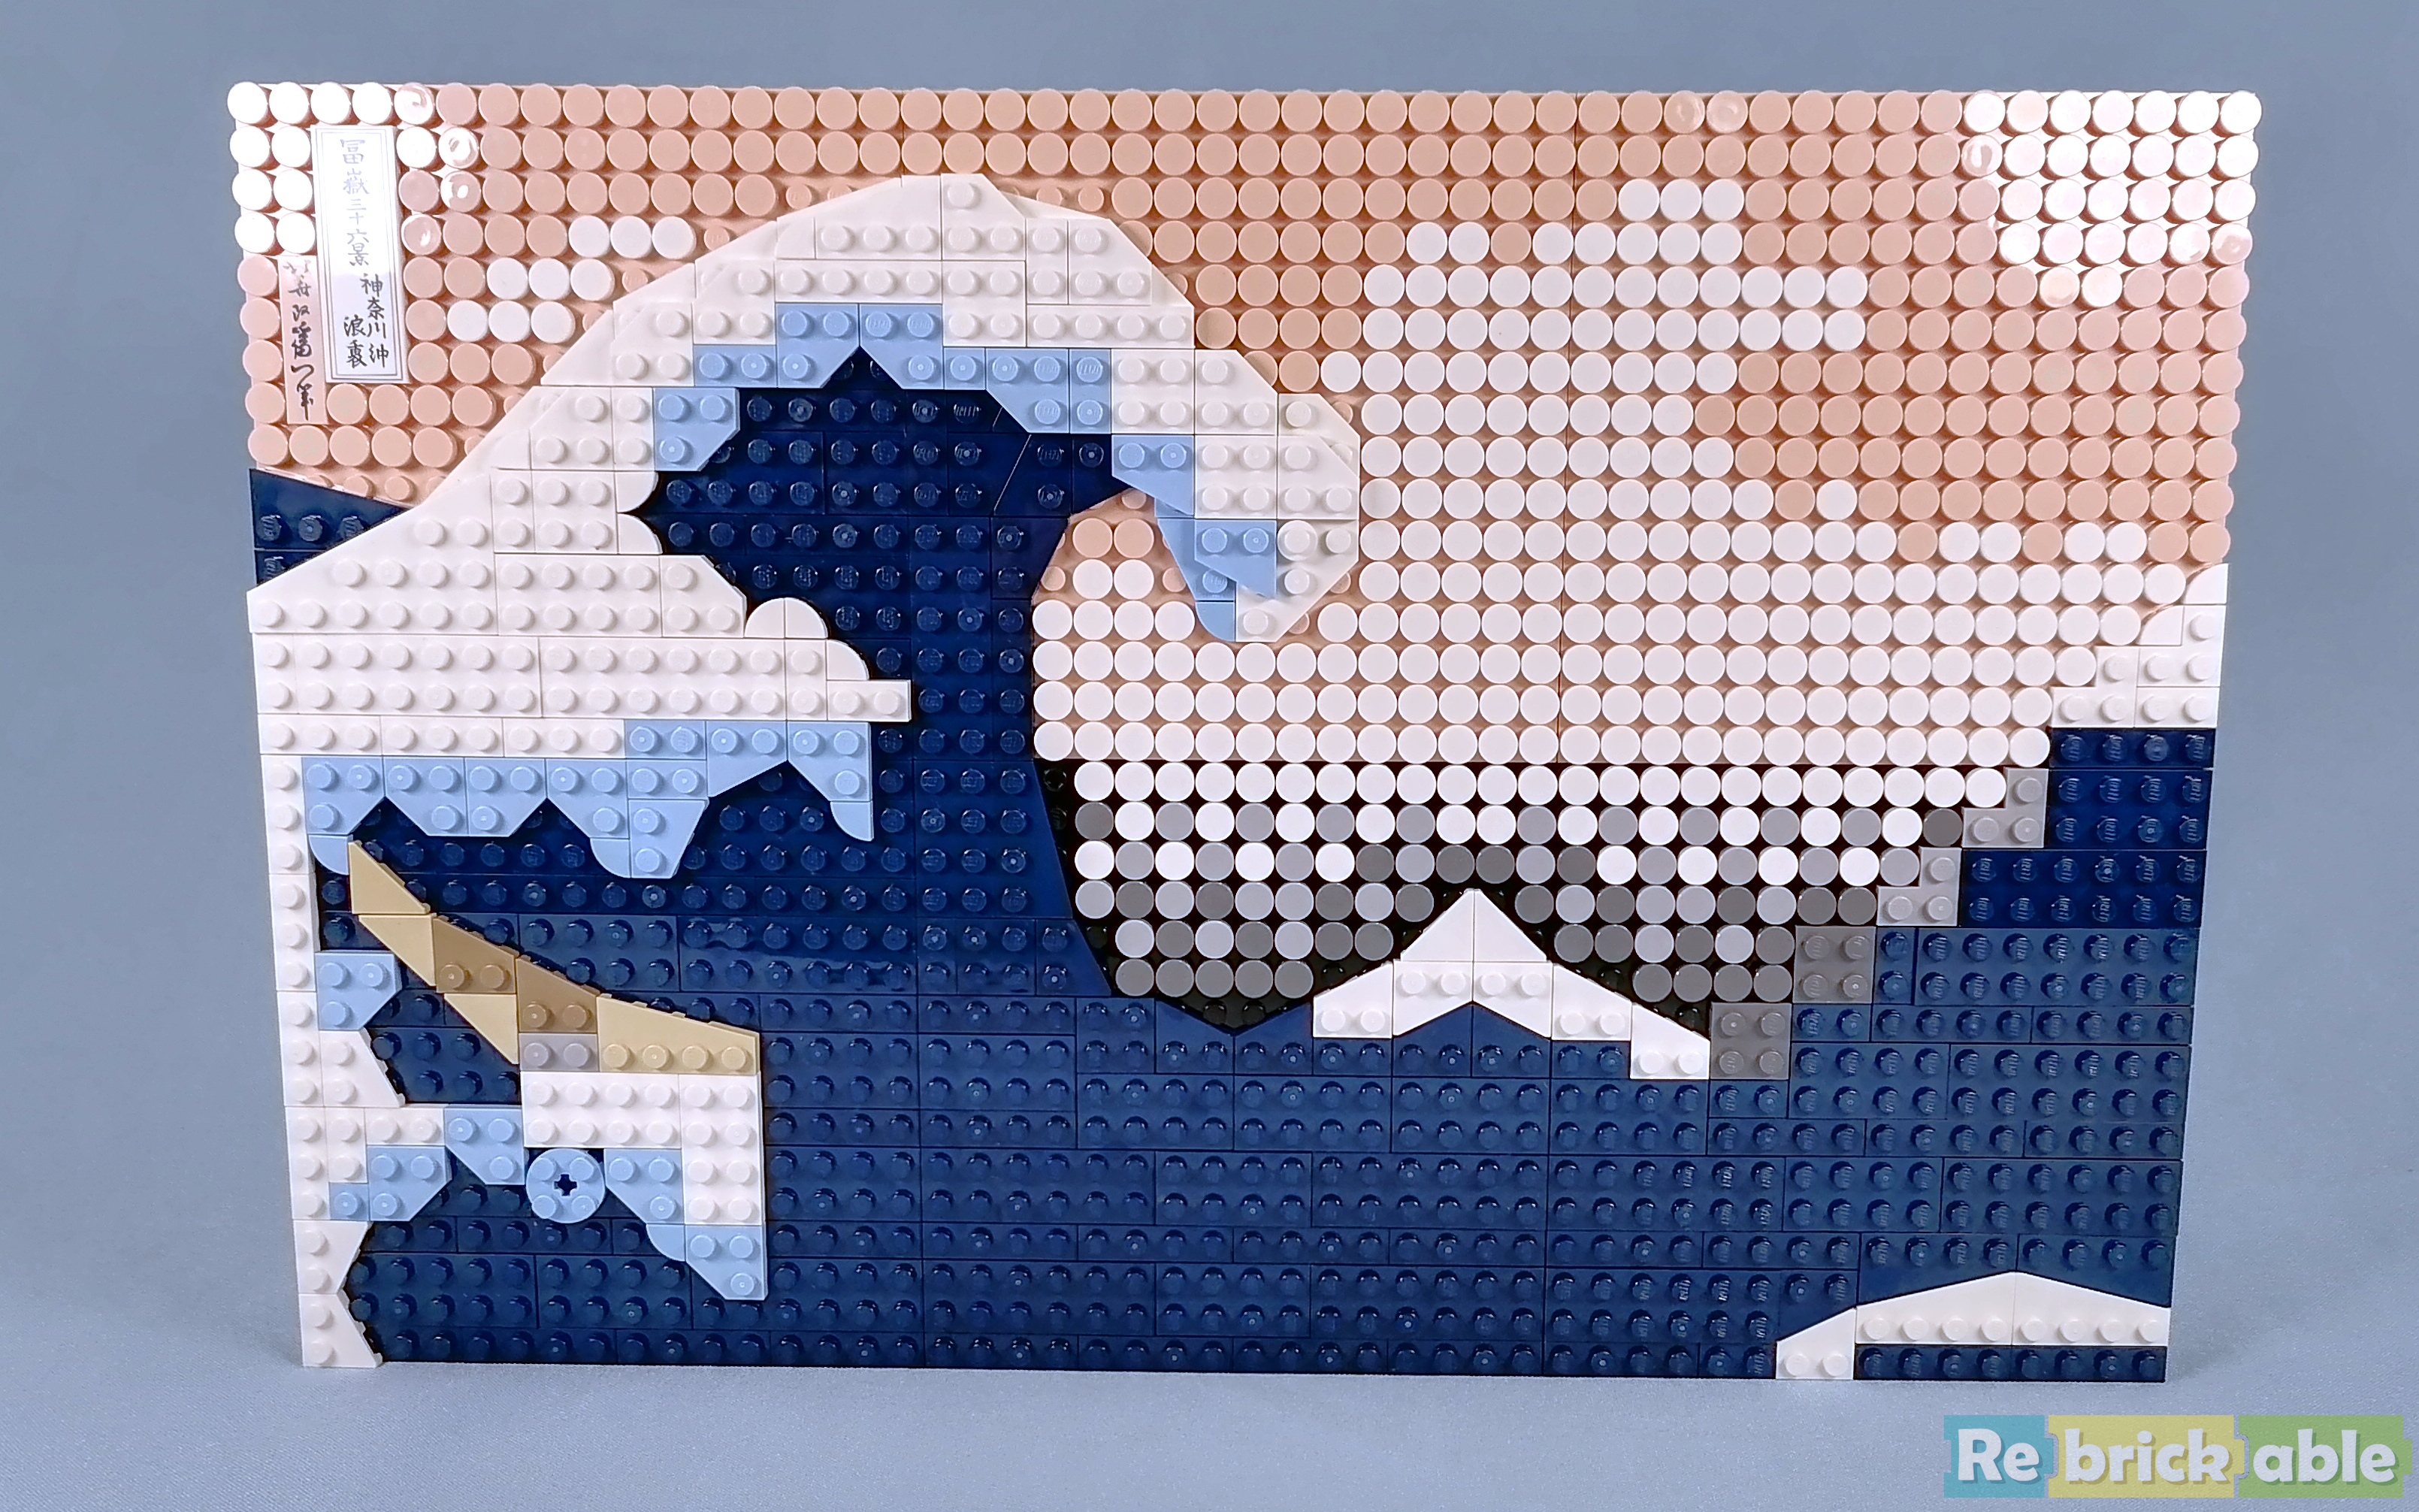 LEGO Art 31208 Hokusai: The Great Wave - LEGO Speed Build Review 